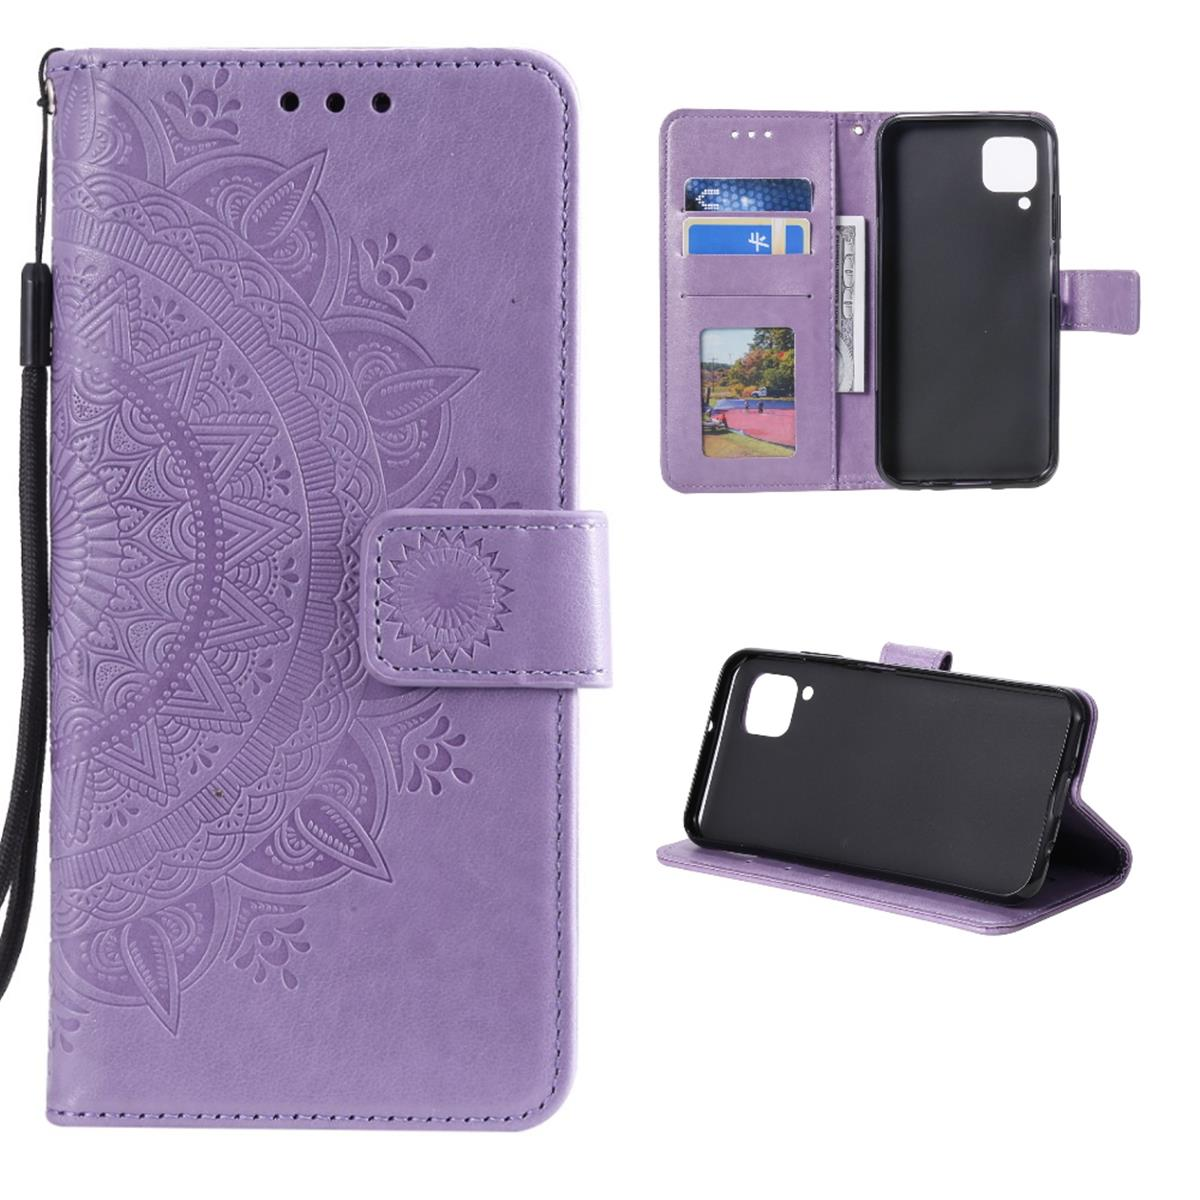 Samsung, Bookcover, COVERKINGZ / Klapphülle Galaxy mit A12 Muster, Lila Mandala M12,